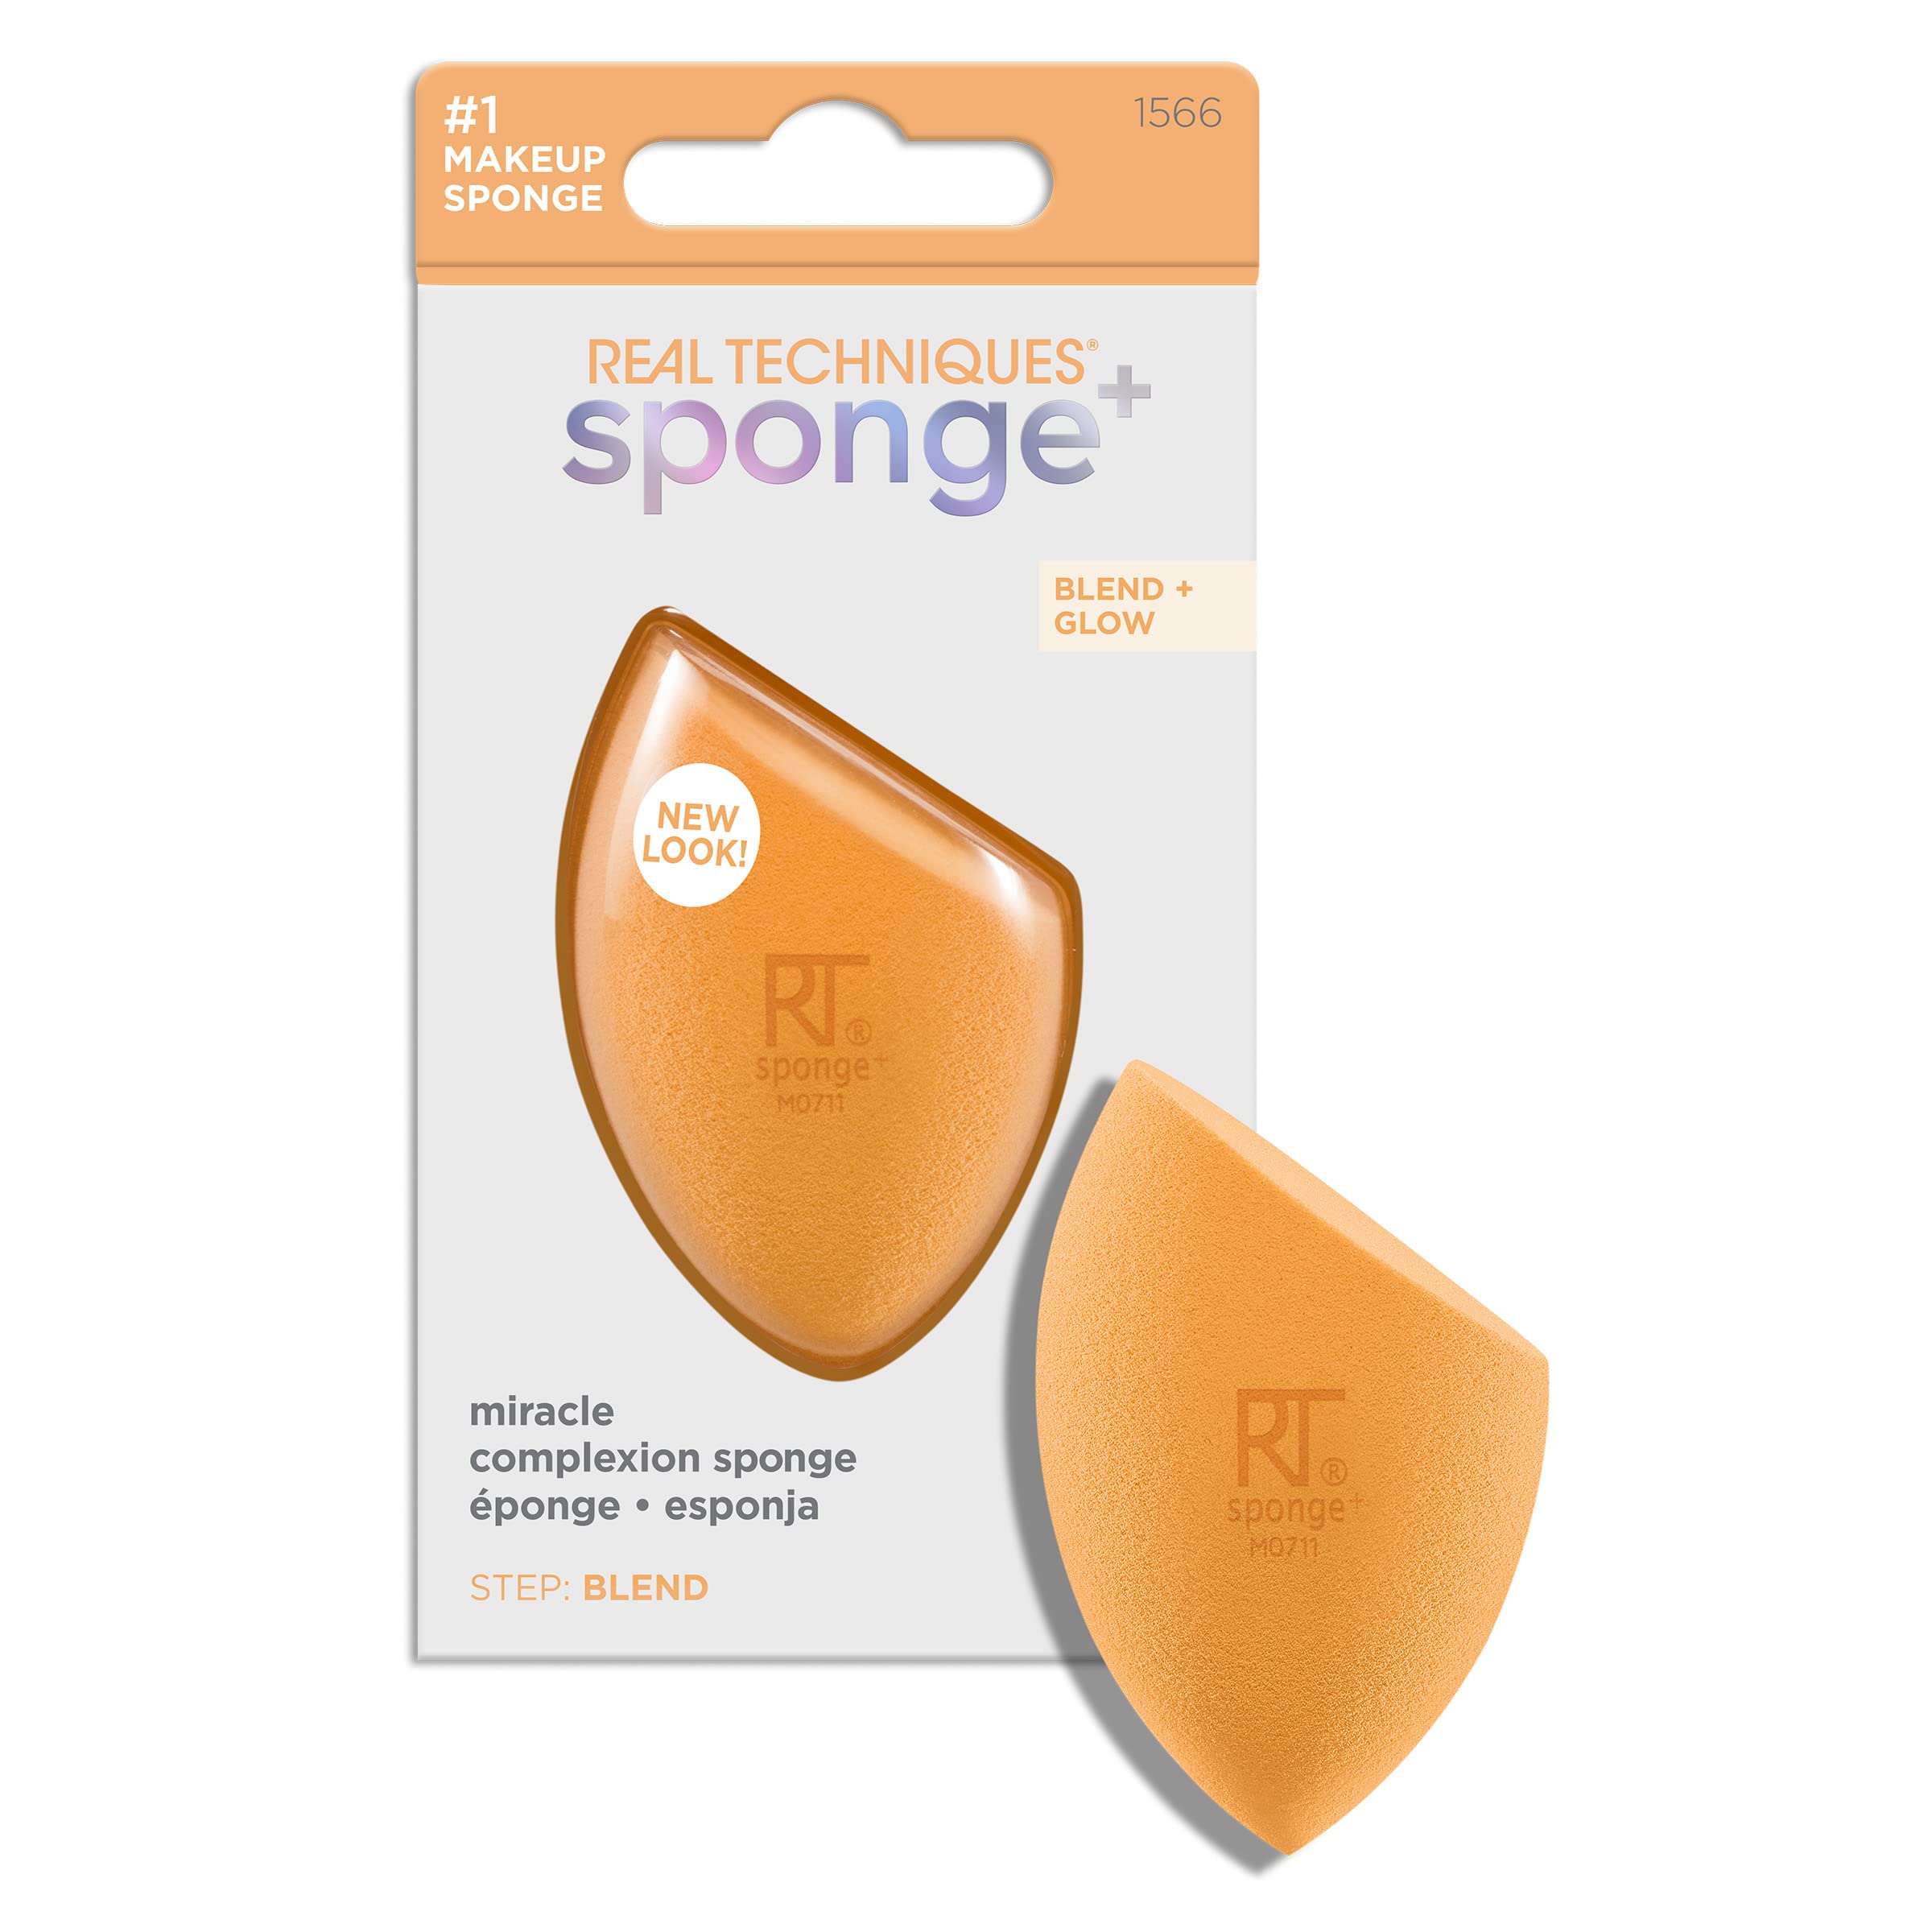 REAL TECHNIQUES Miracle Complexion Makeup Sponge for full cover foundation (Packaging and Colour May Vary) Orange